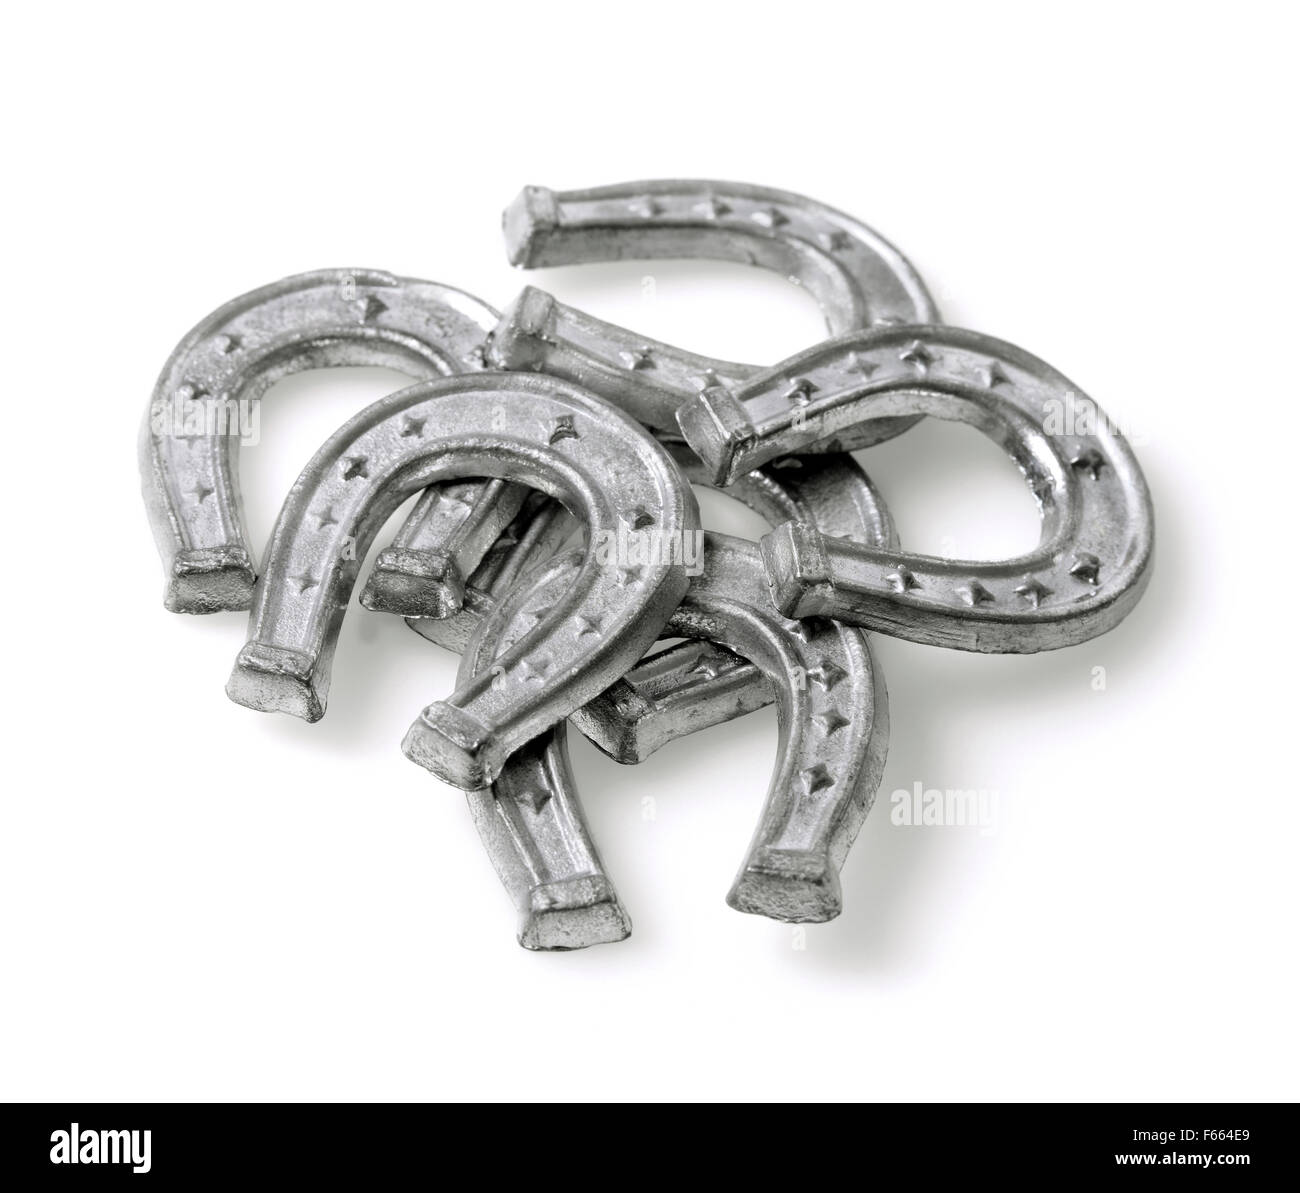 Small horse shoes made of tin, used in Finnish new years ritual where molten tin is used to foresee the coming new year Stock Photo